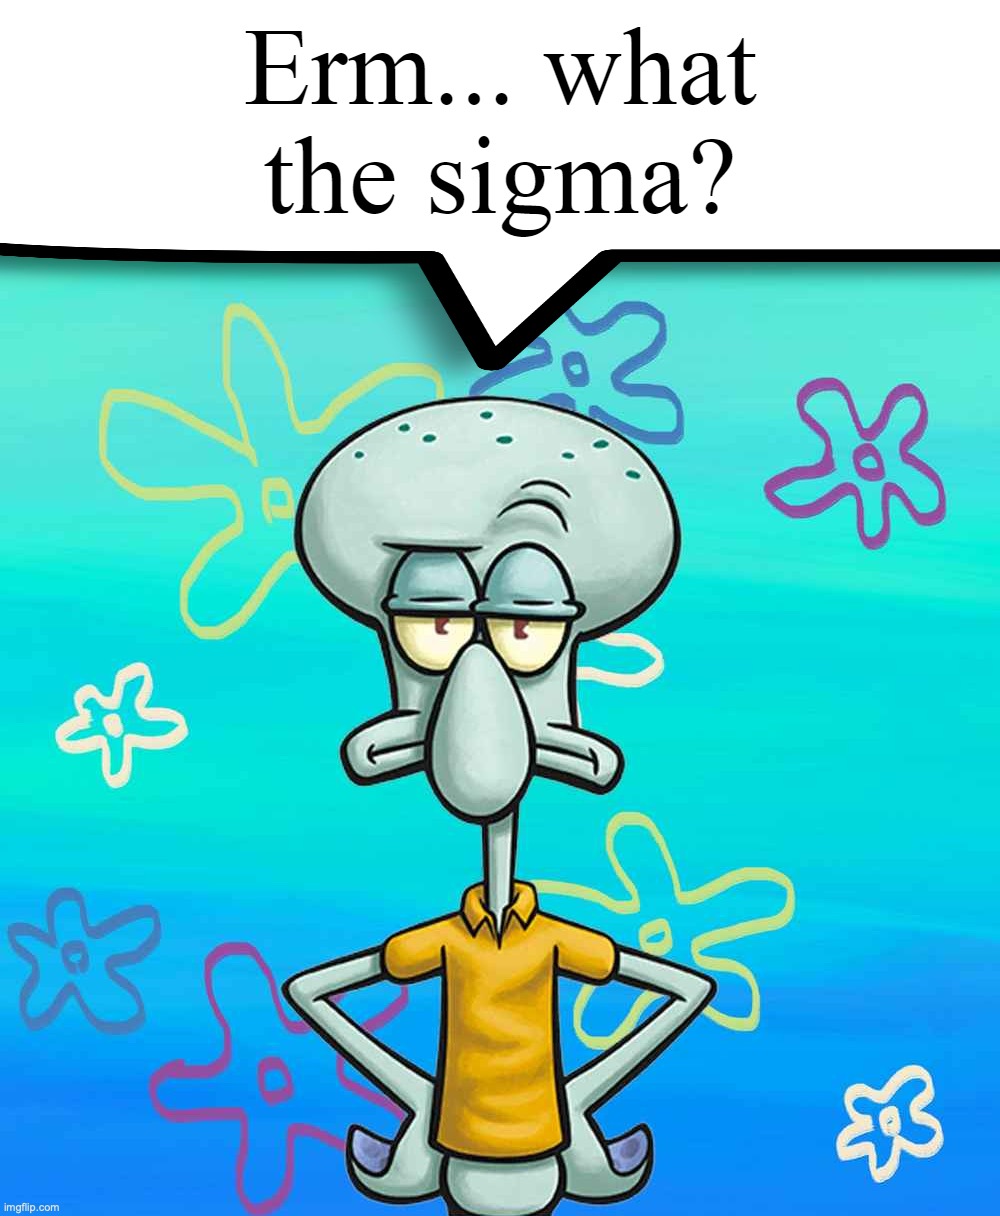 WHAT THE SIGMA | image tagged in erm what the sigma,memes,funny,squidward,spongebob | made w/ Imgflip meme maker